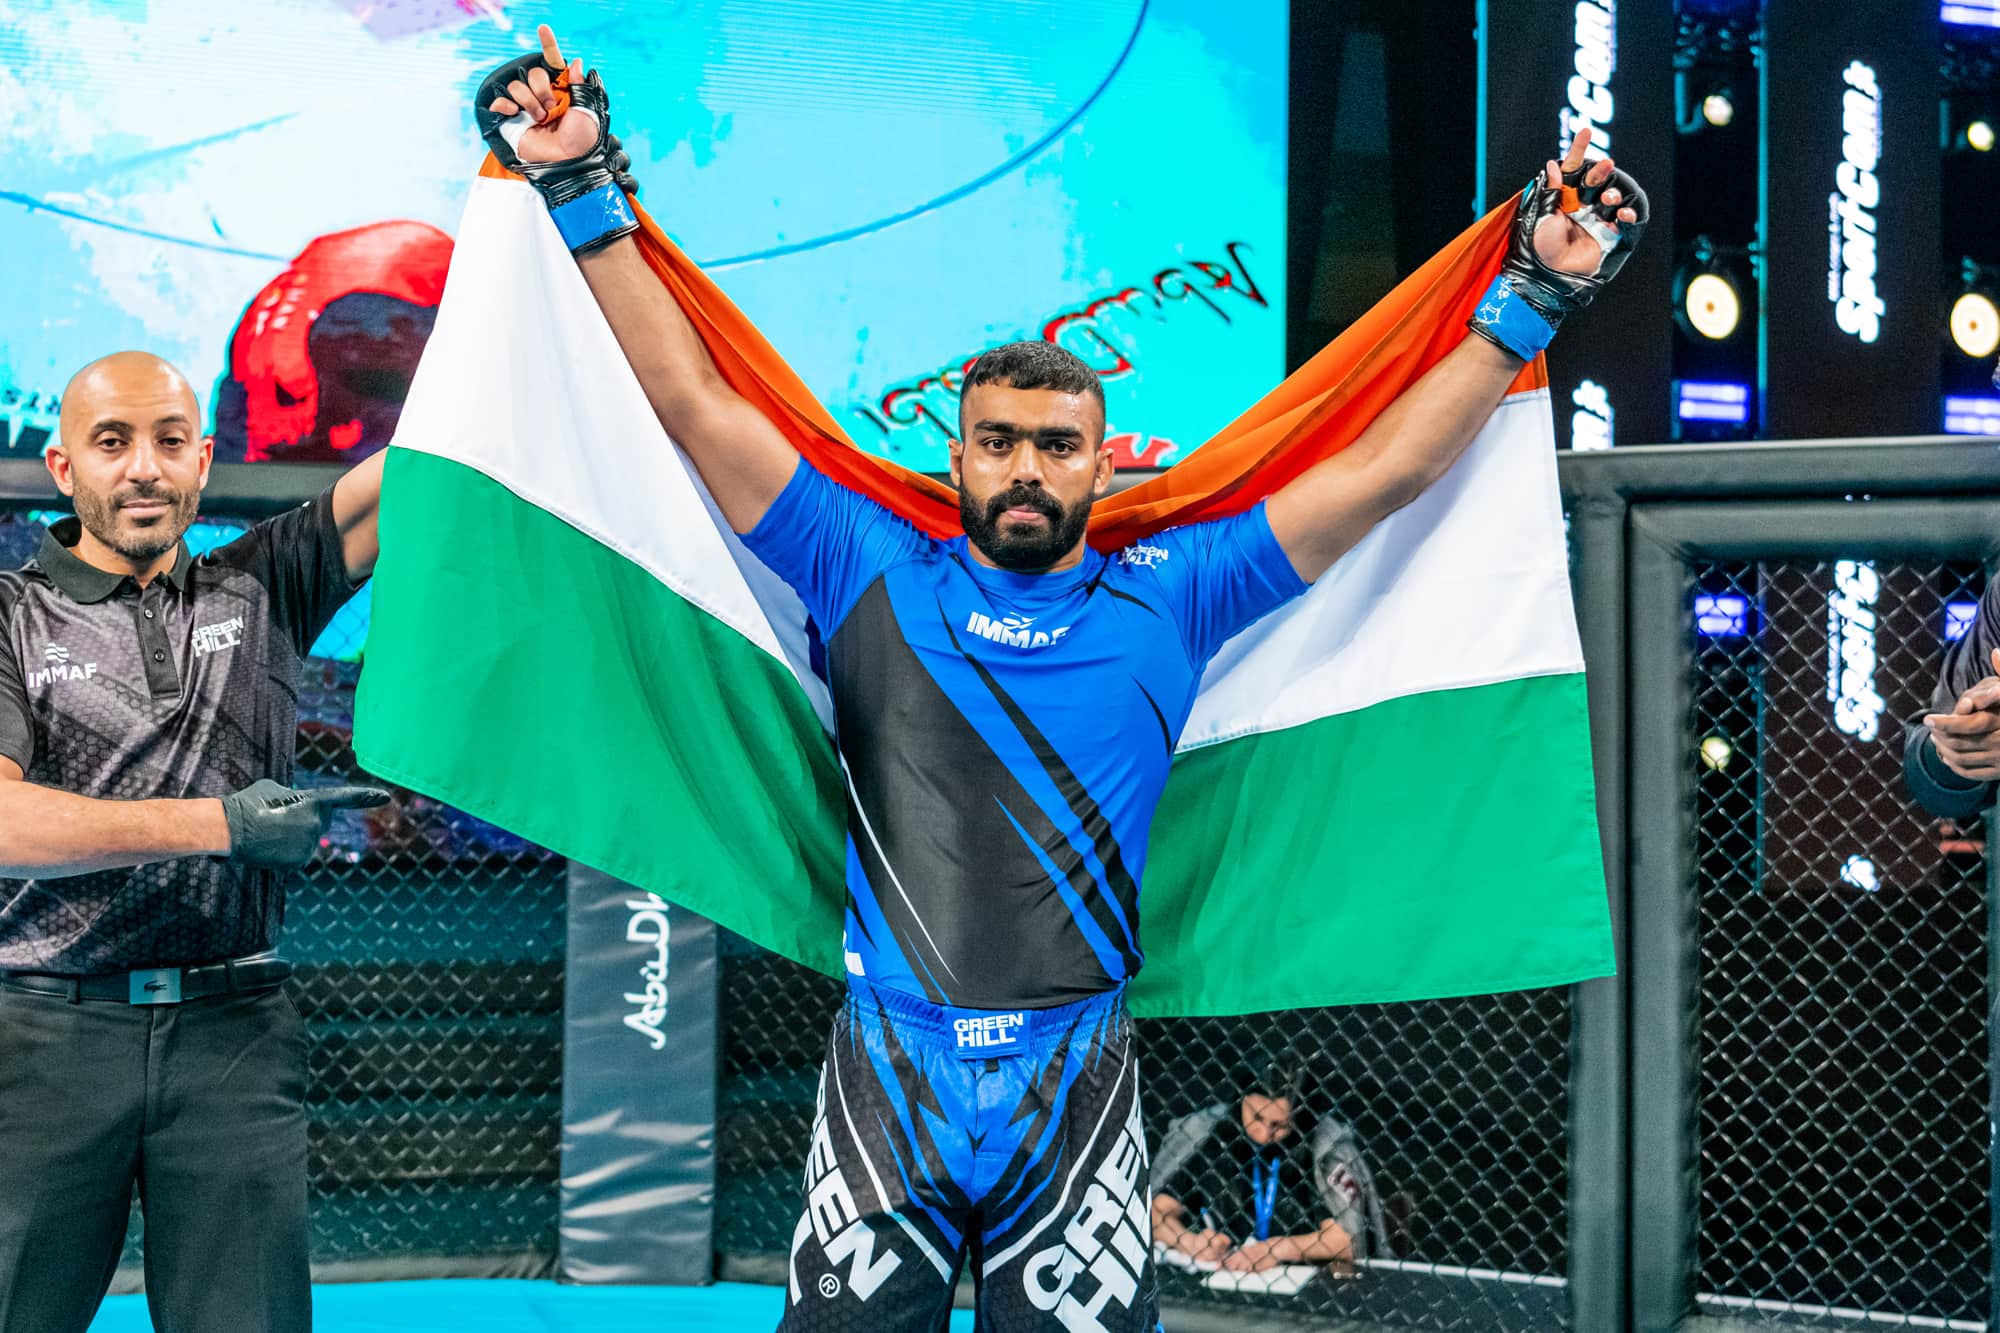 India’s Ramston Rodriques Details His Time Training with Conor McGregor in Dubai